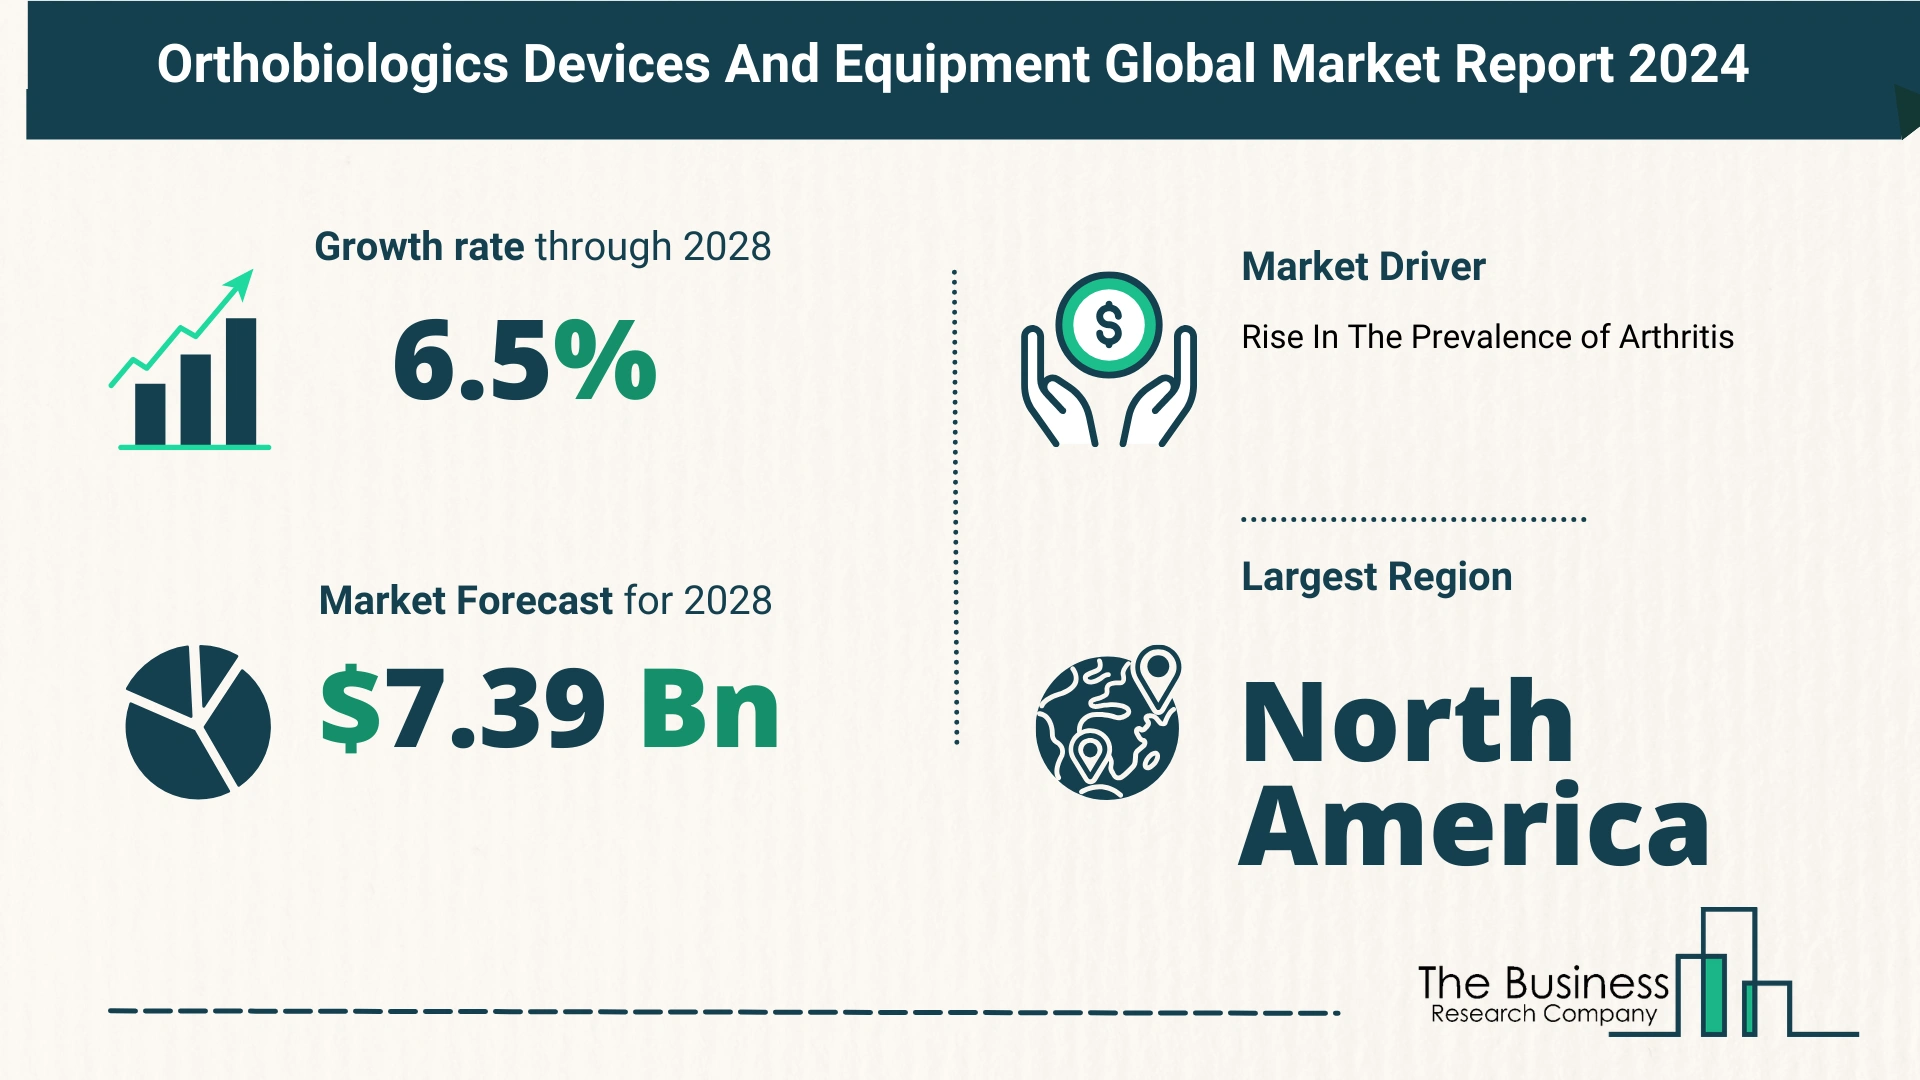 Global Orthobiologics Devices And Equipment Market Size